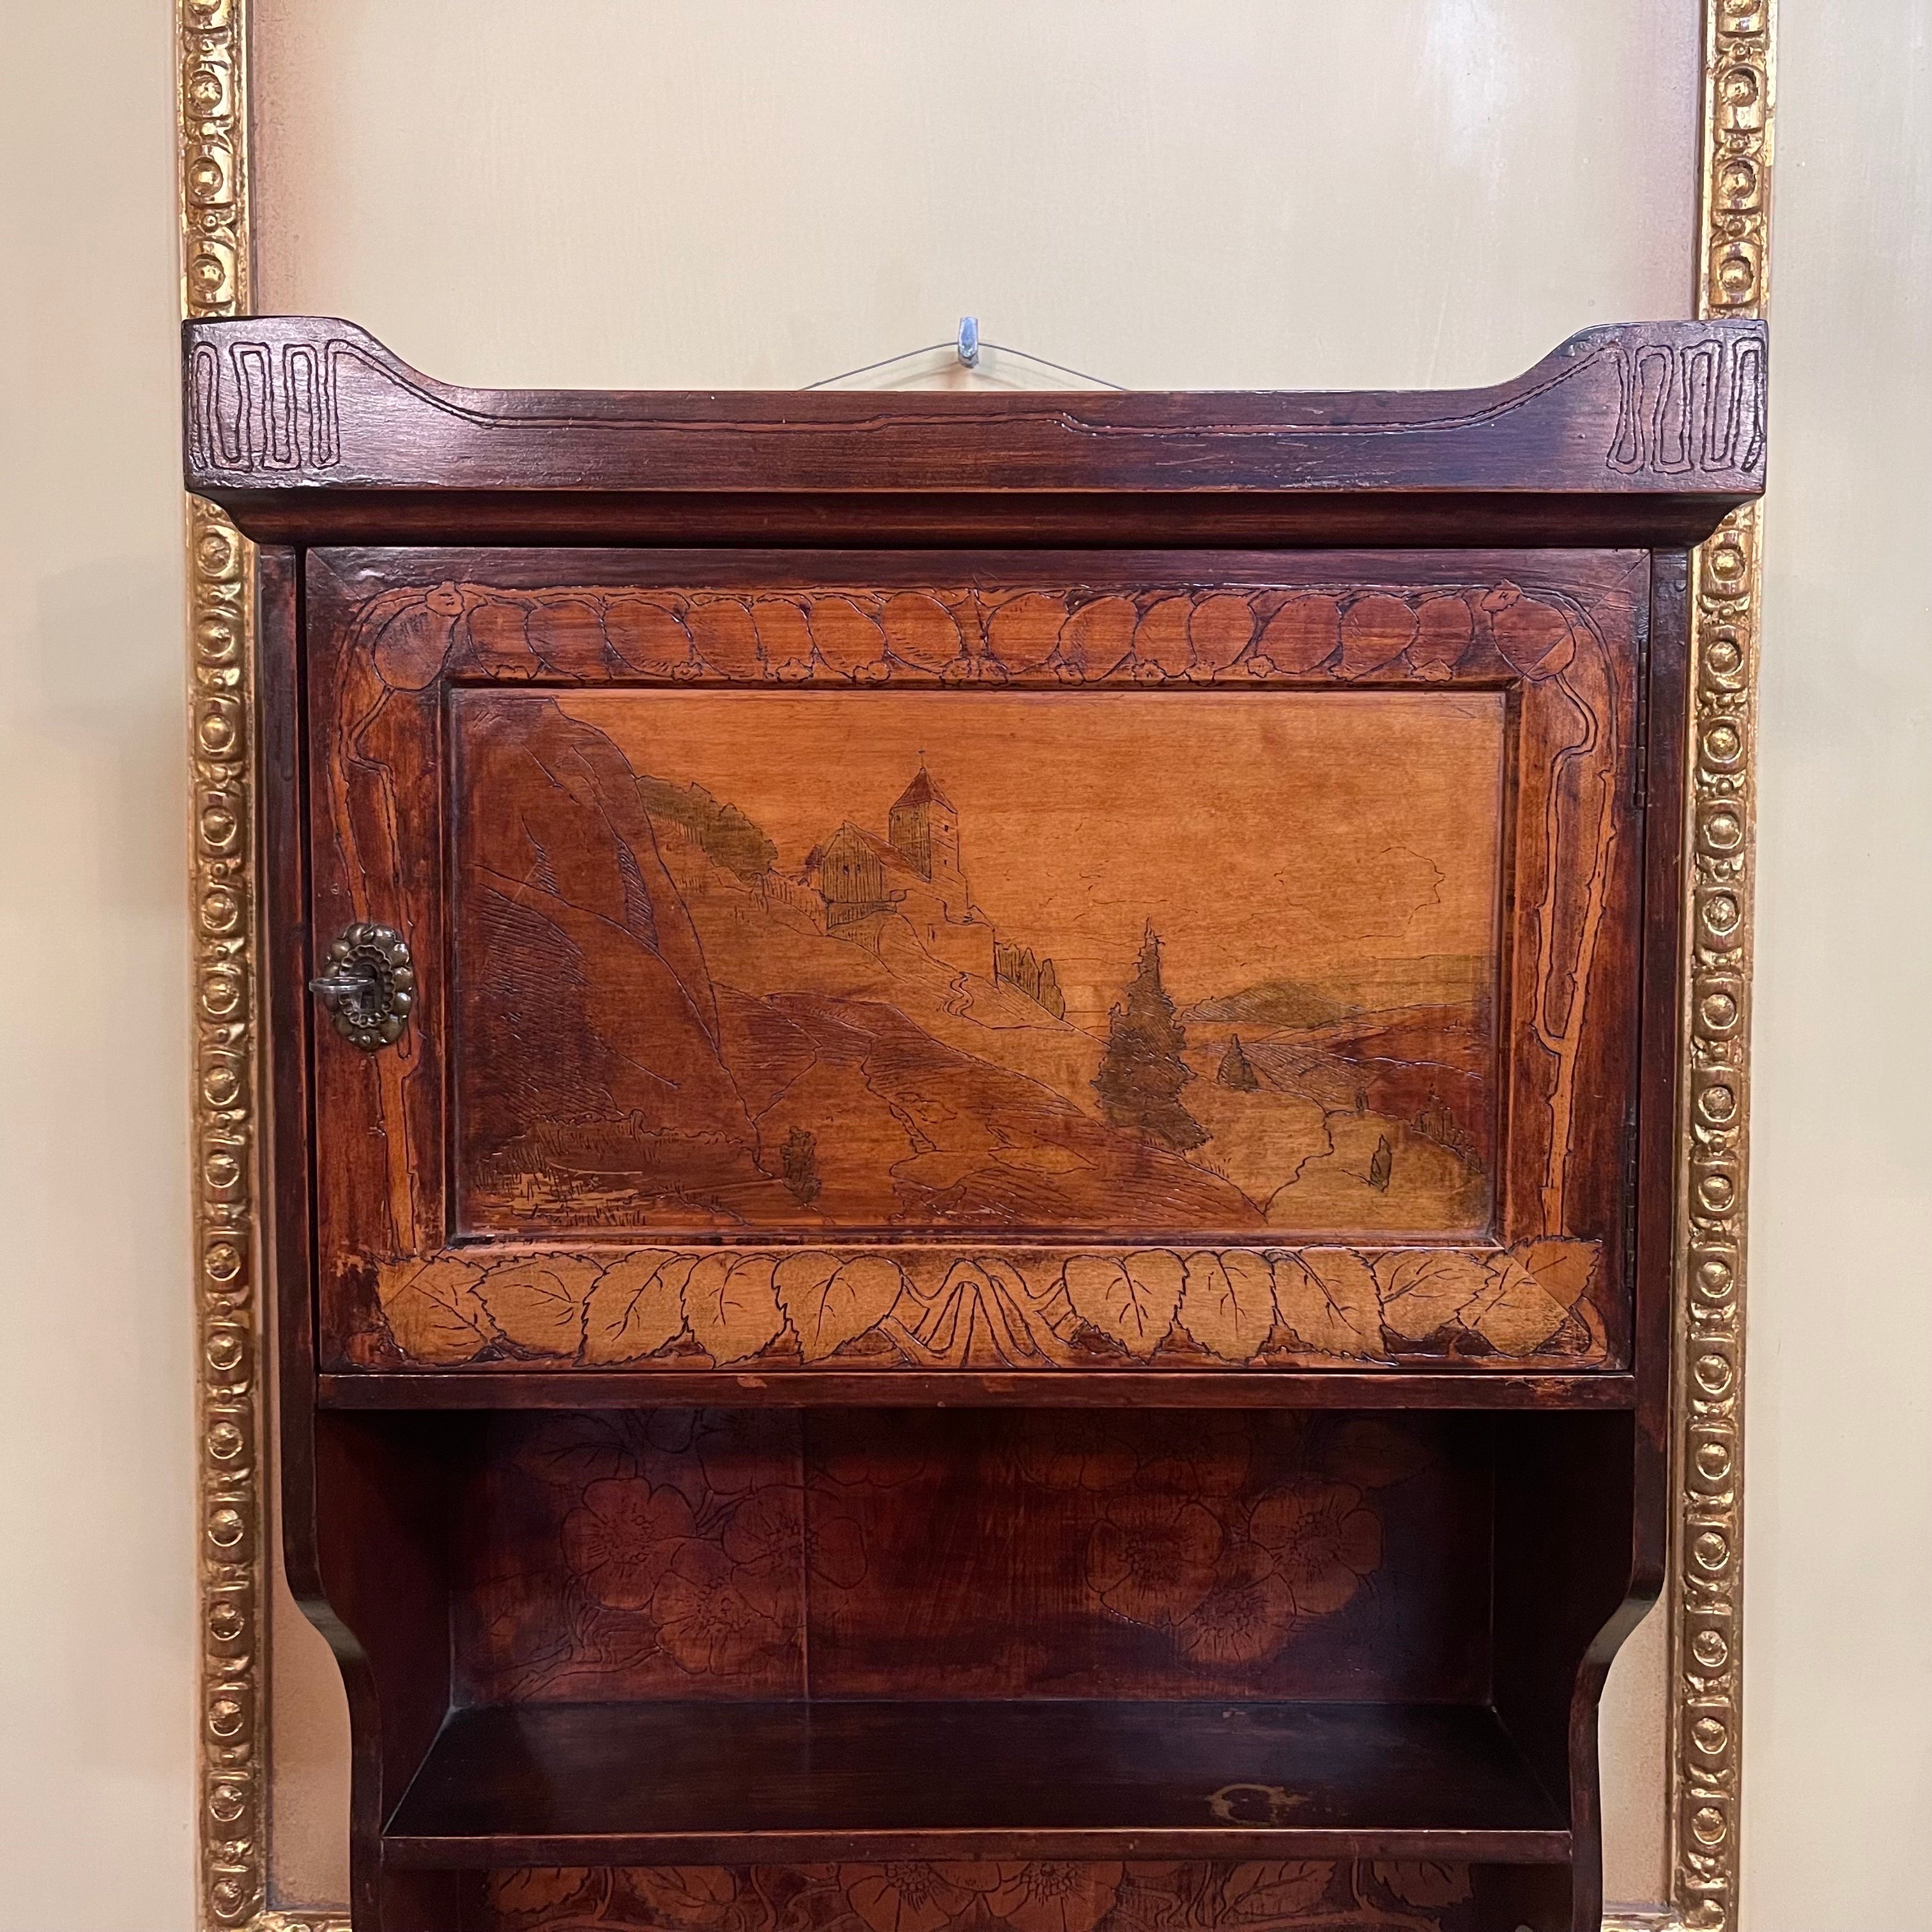 Exceptional Art Nouveau hanging cupboards
With fruitwood inlays
Around 1910
In good condition